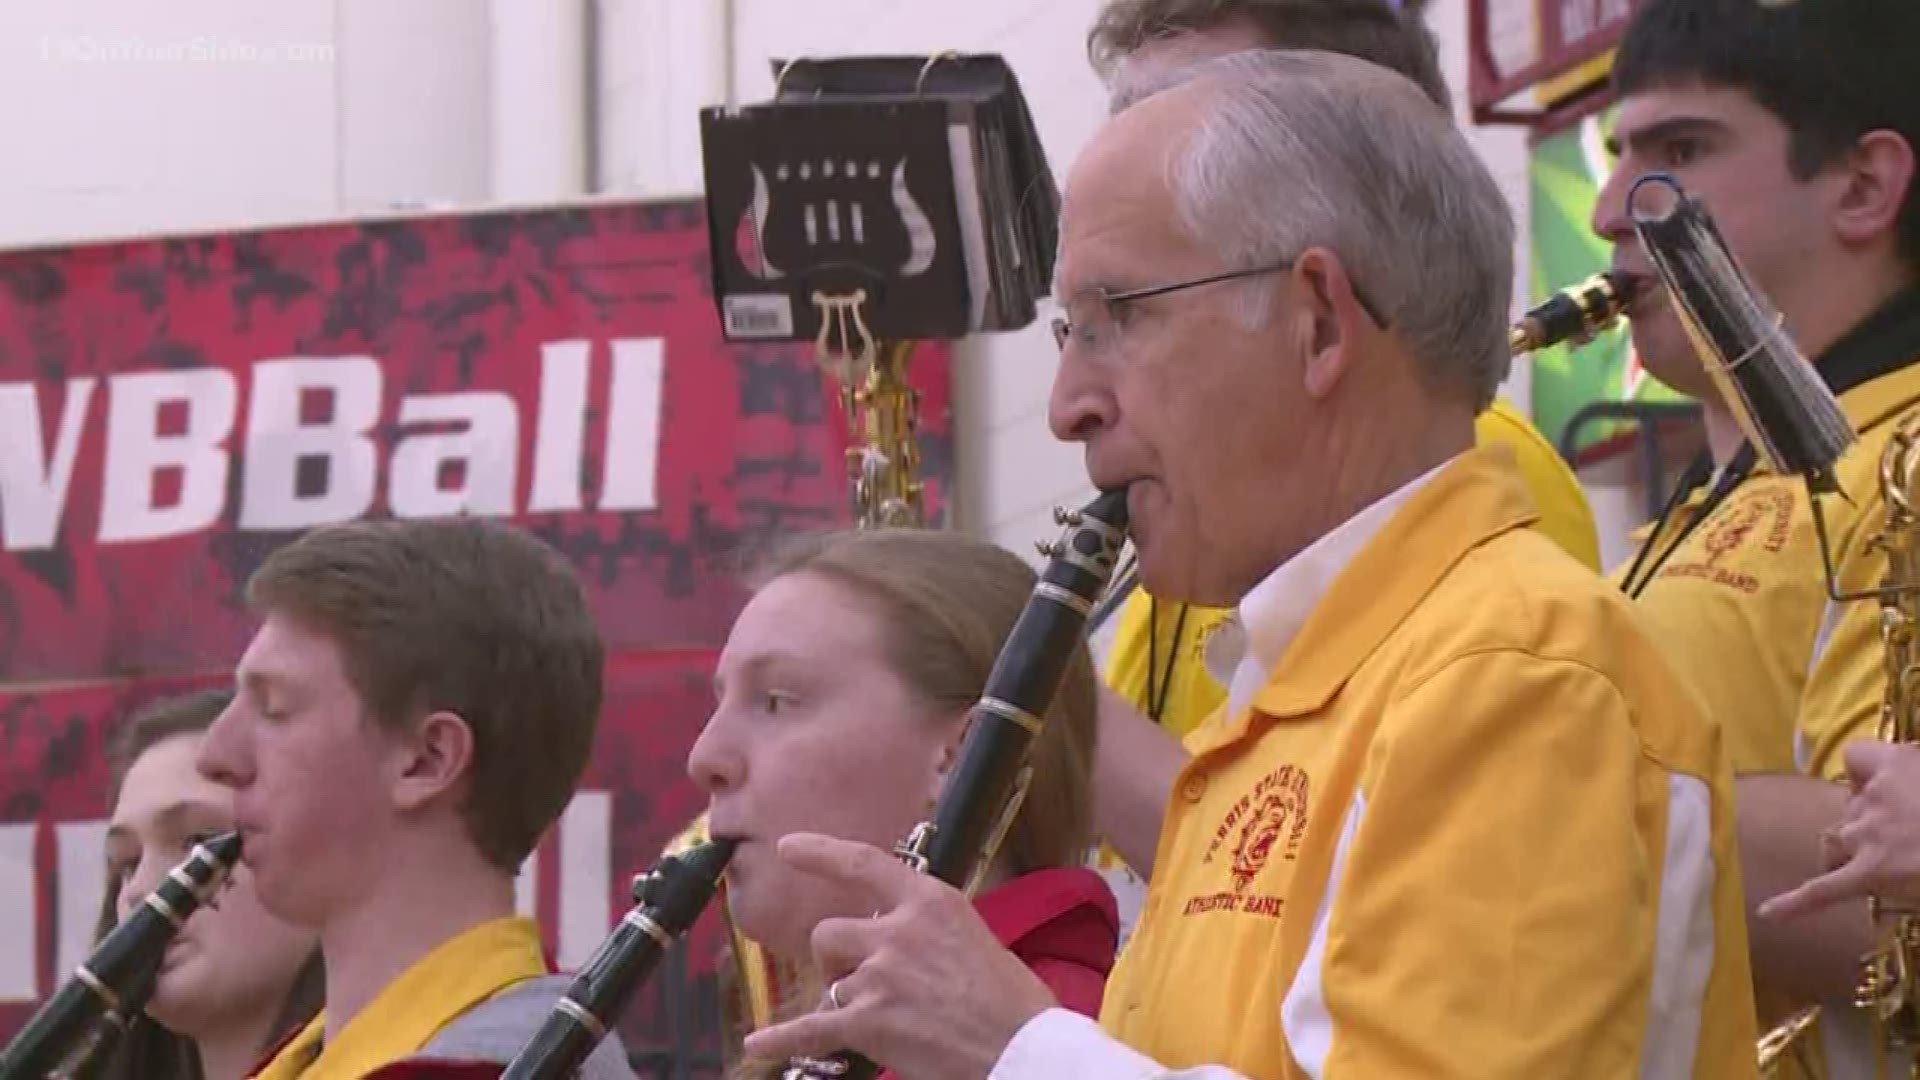 Despite David Eisler's busy schedule, the 68-year-old plays his clarinet with the band every chance he gets.